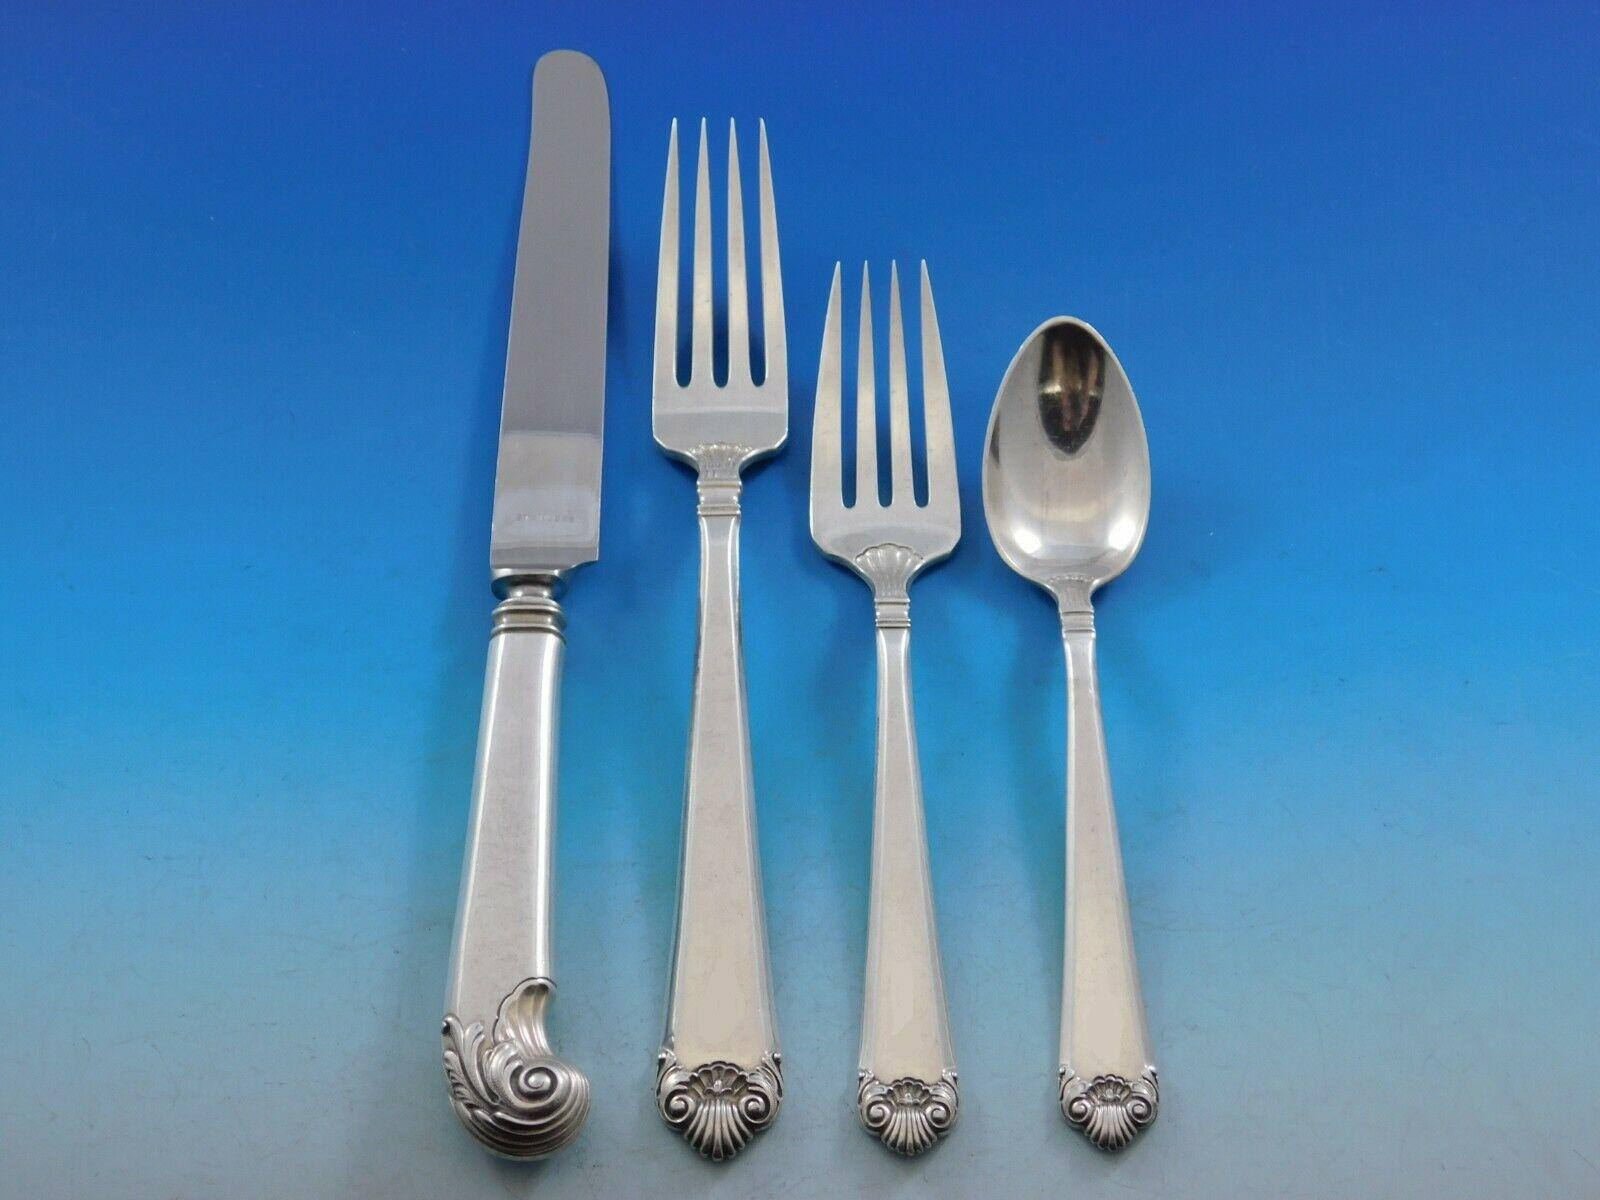 Impressive dinner size George II by Watson sterling silver flatware set - 84 pieces. This set includes:

12 dinner size knives, pistol grip handles, 9 1/2